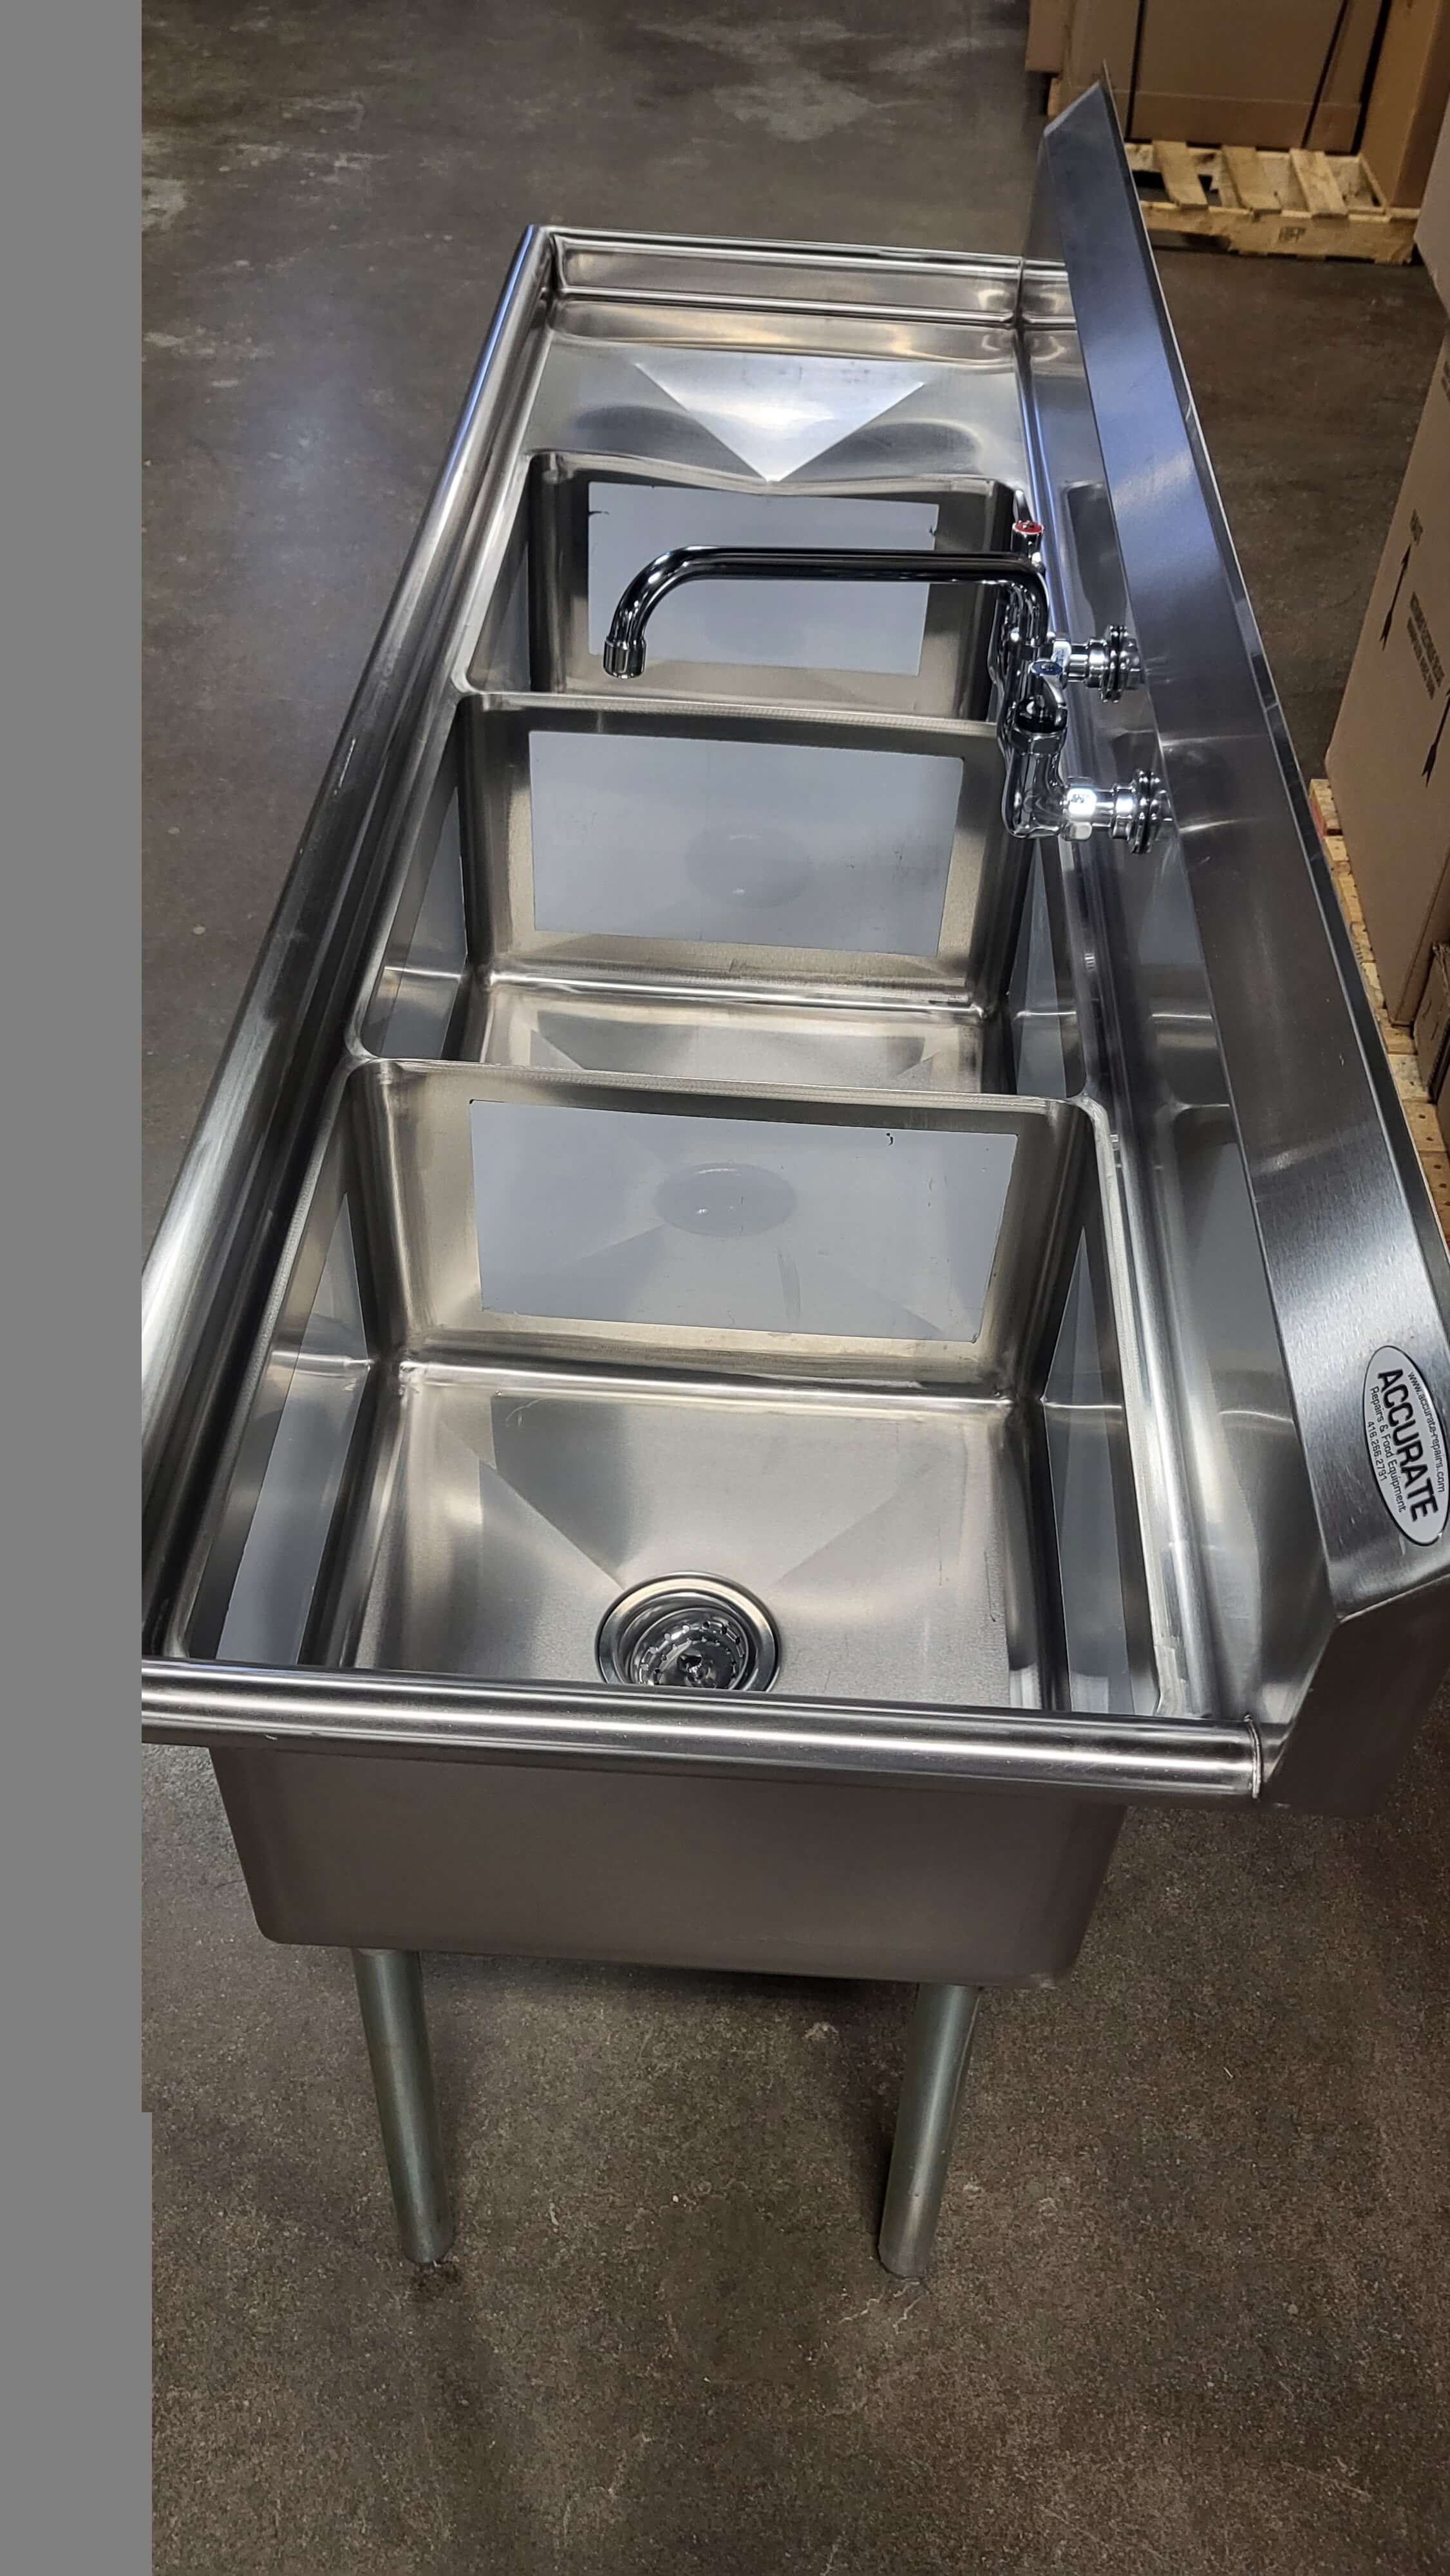 Thumbnail - Omcan 43764 Three Compartment Sink